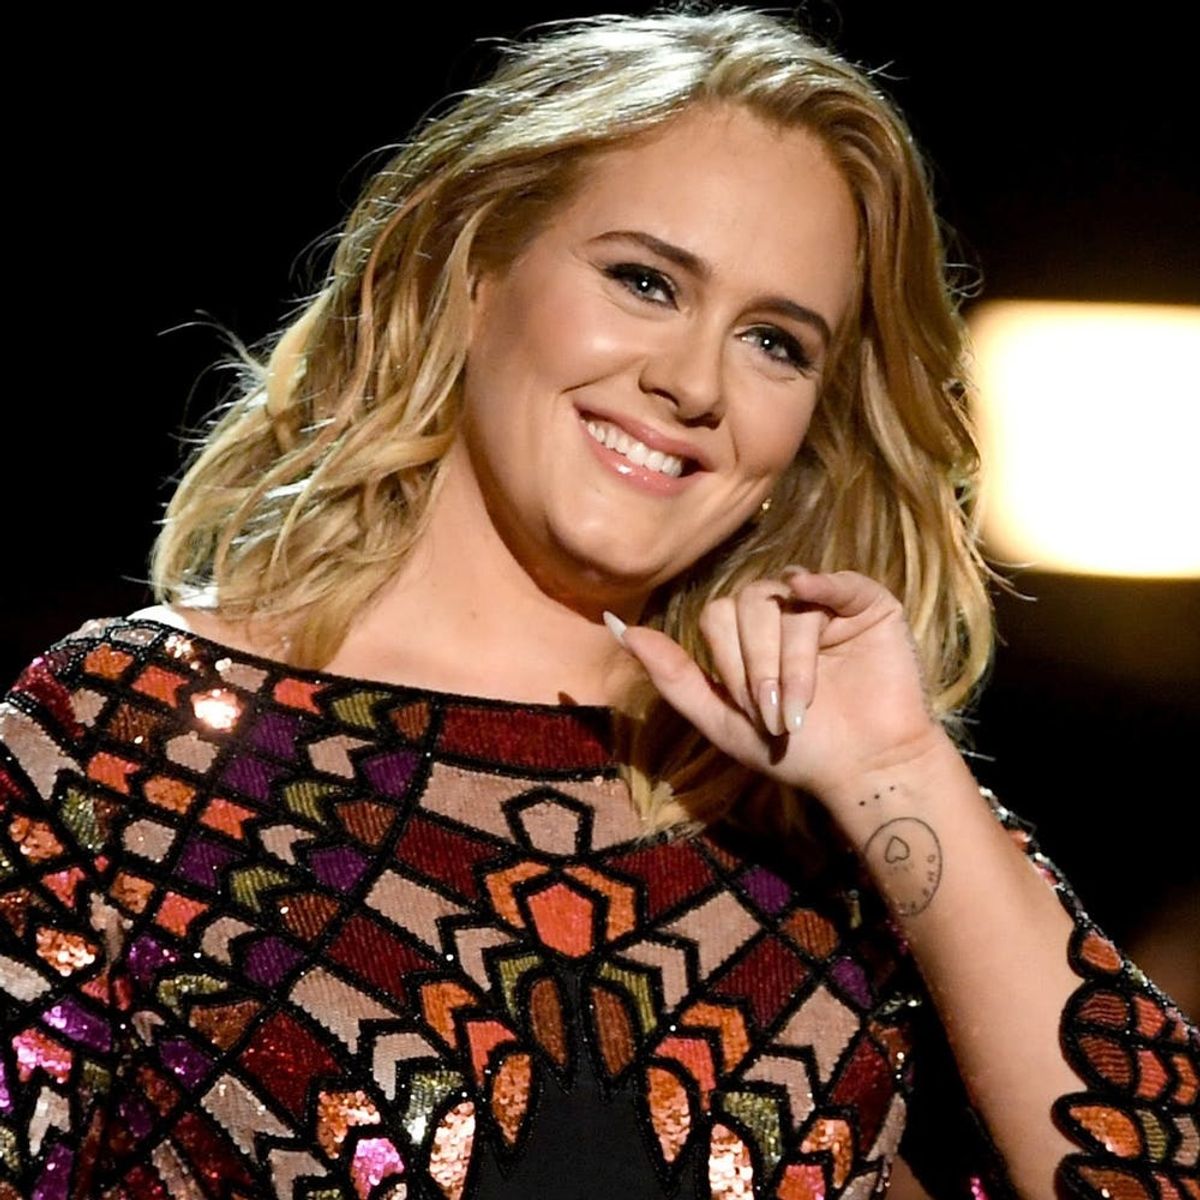 Adele’s New Side Hustle Is Not at All What You’d Expect